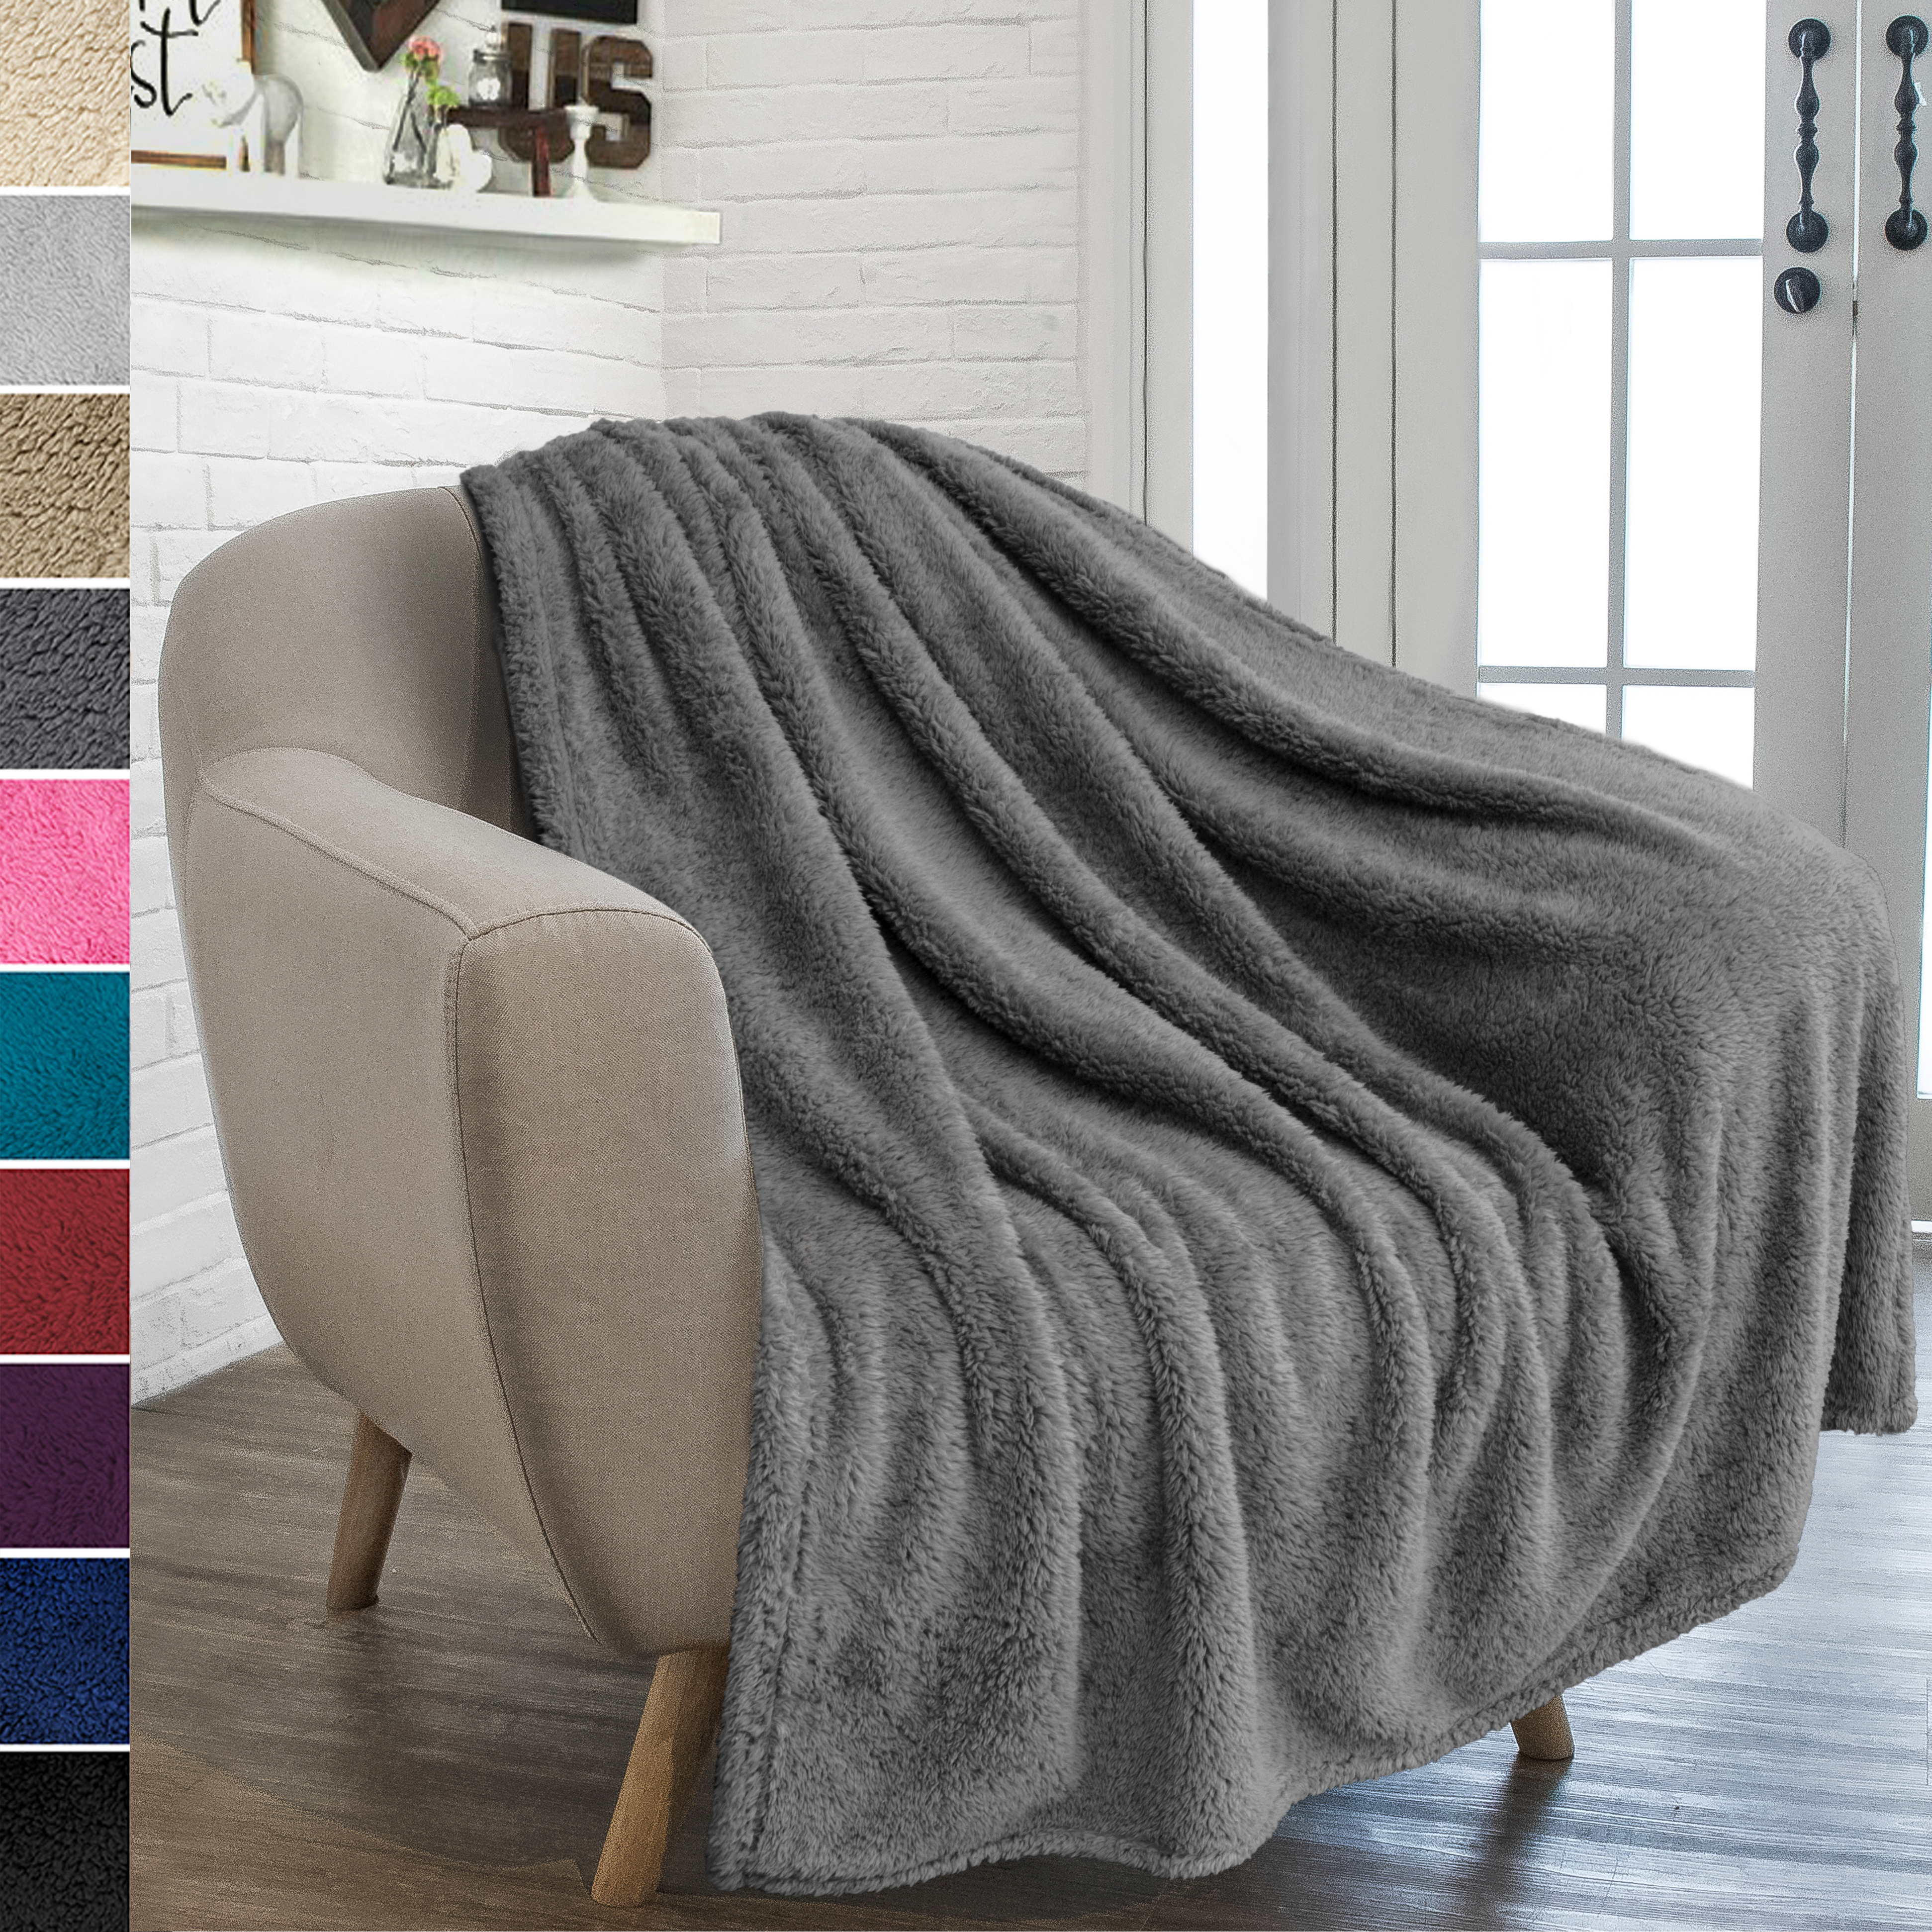 Soft Fuzzy Warm Cozy Throw Blanket with Fluffy Sherpa Fleece Full/Queen and King 